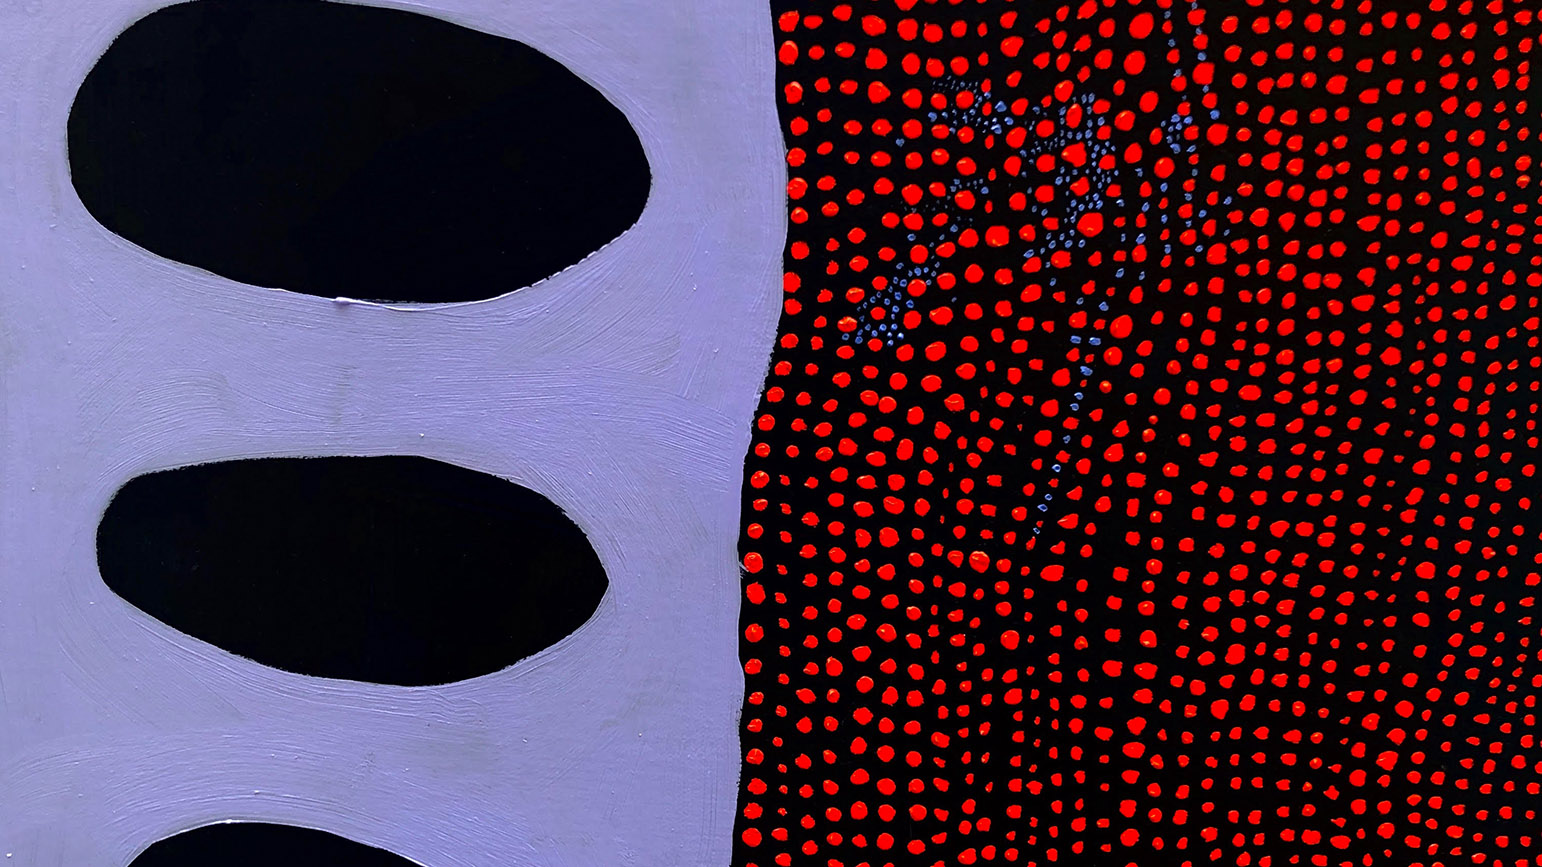 Abstract painting with large dots on the left against a purple background and small red dots on the right against a black background